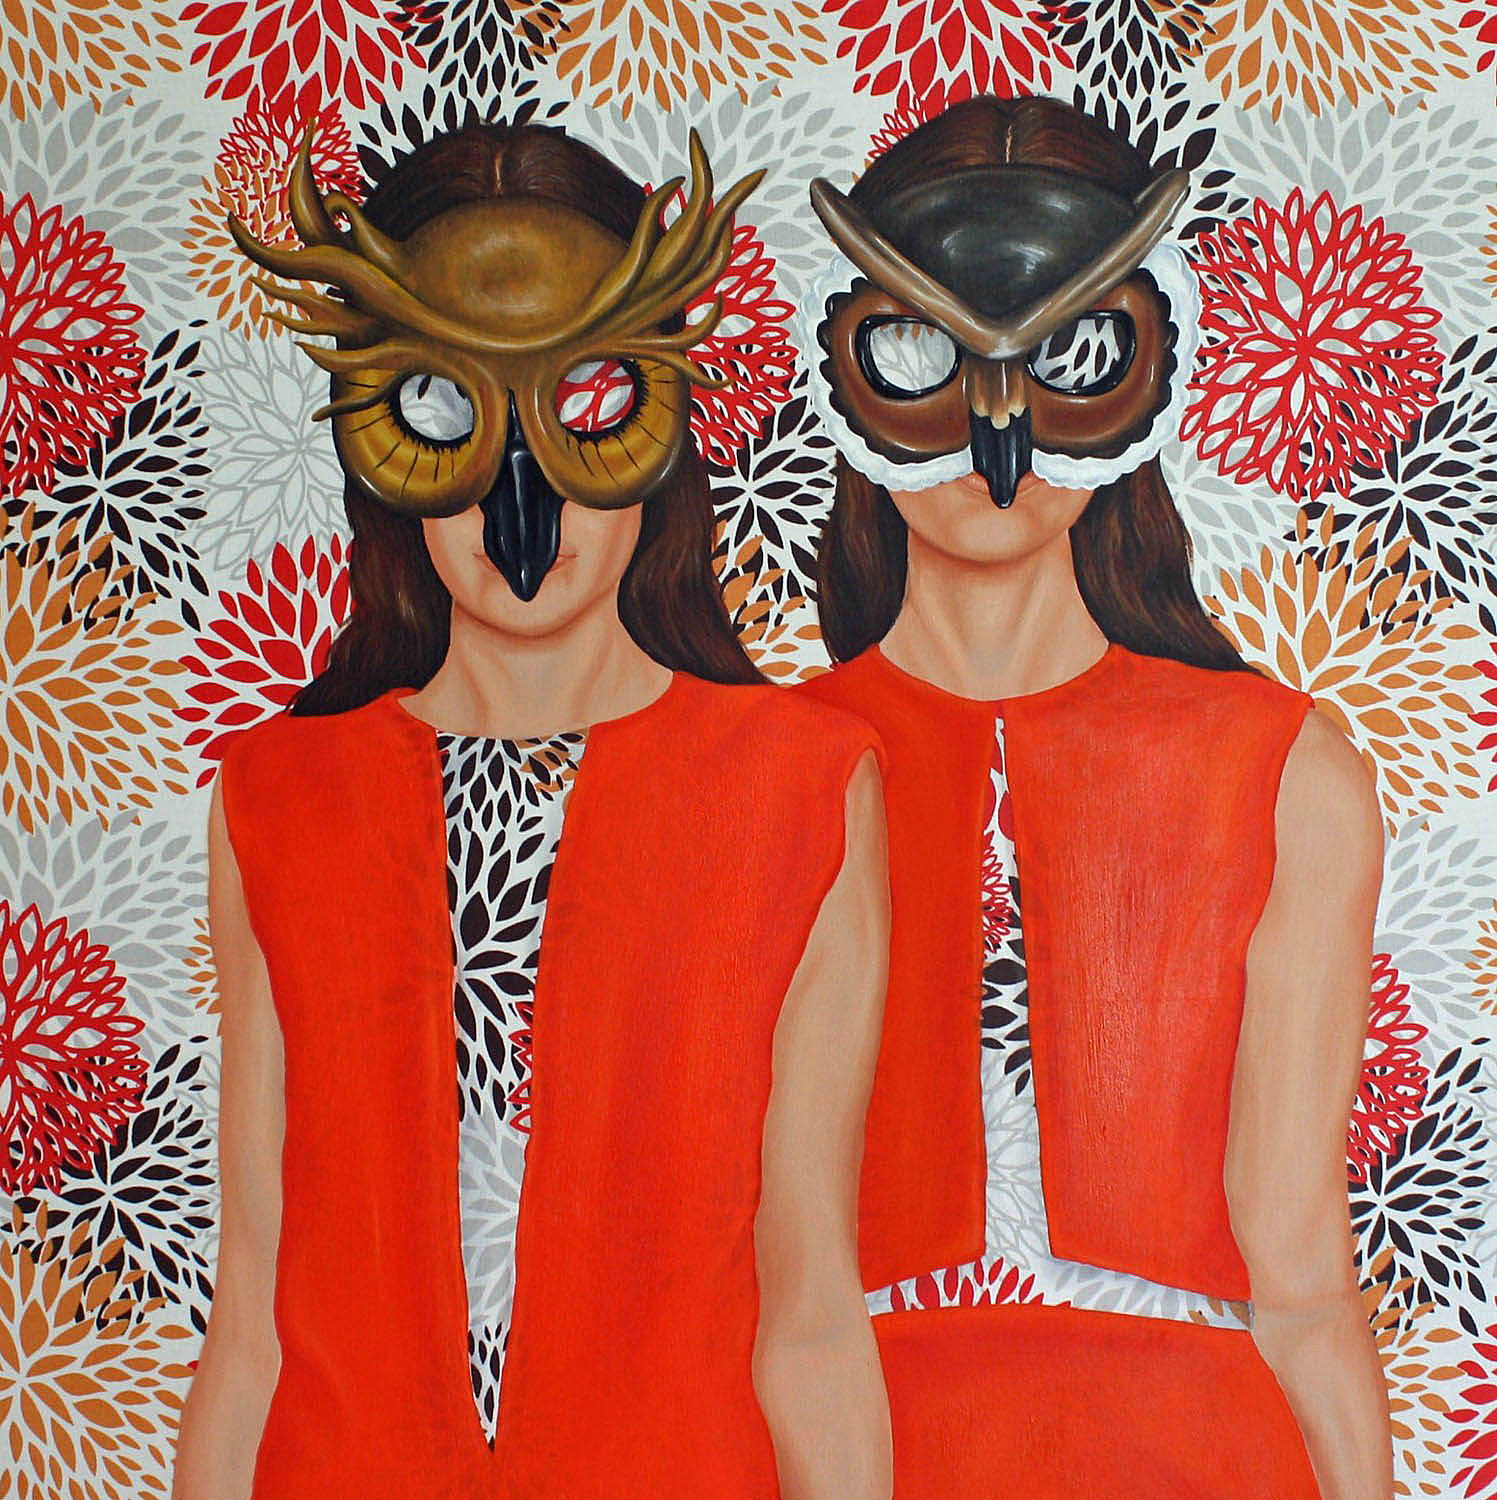 The Wise Ones, 2013. Oil on fabric, 30 x 30 in.